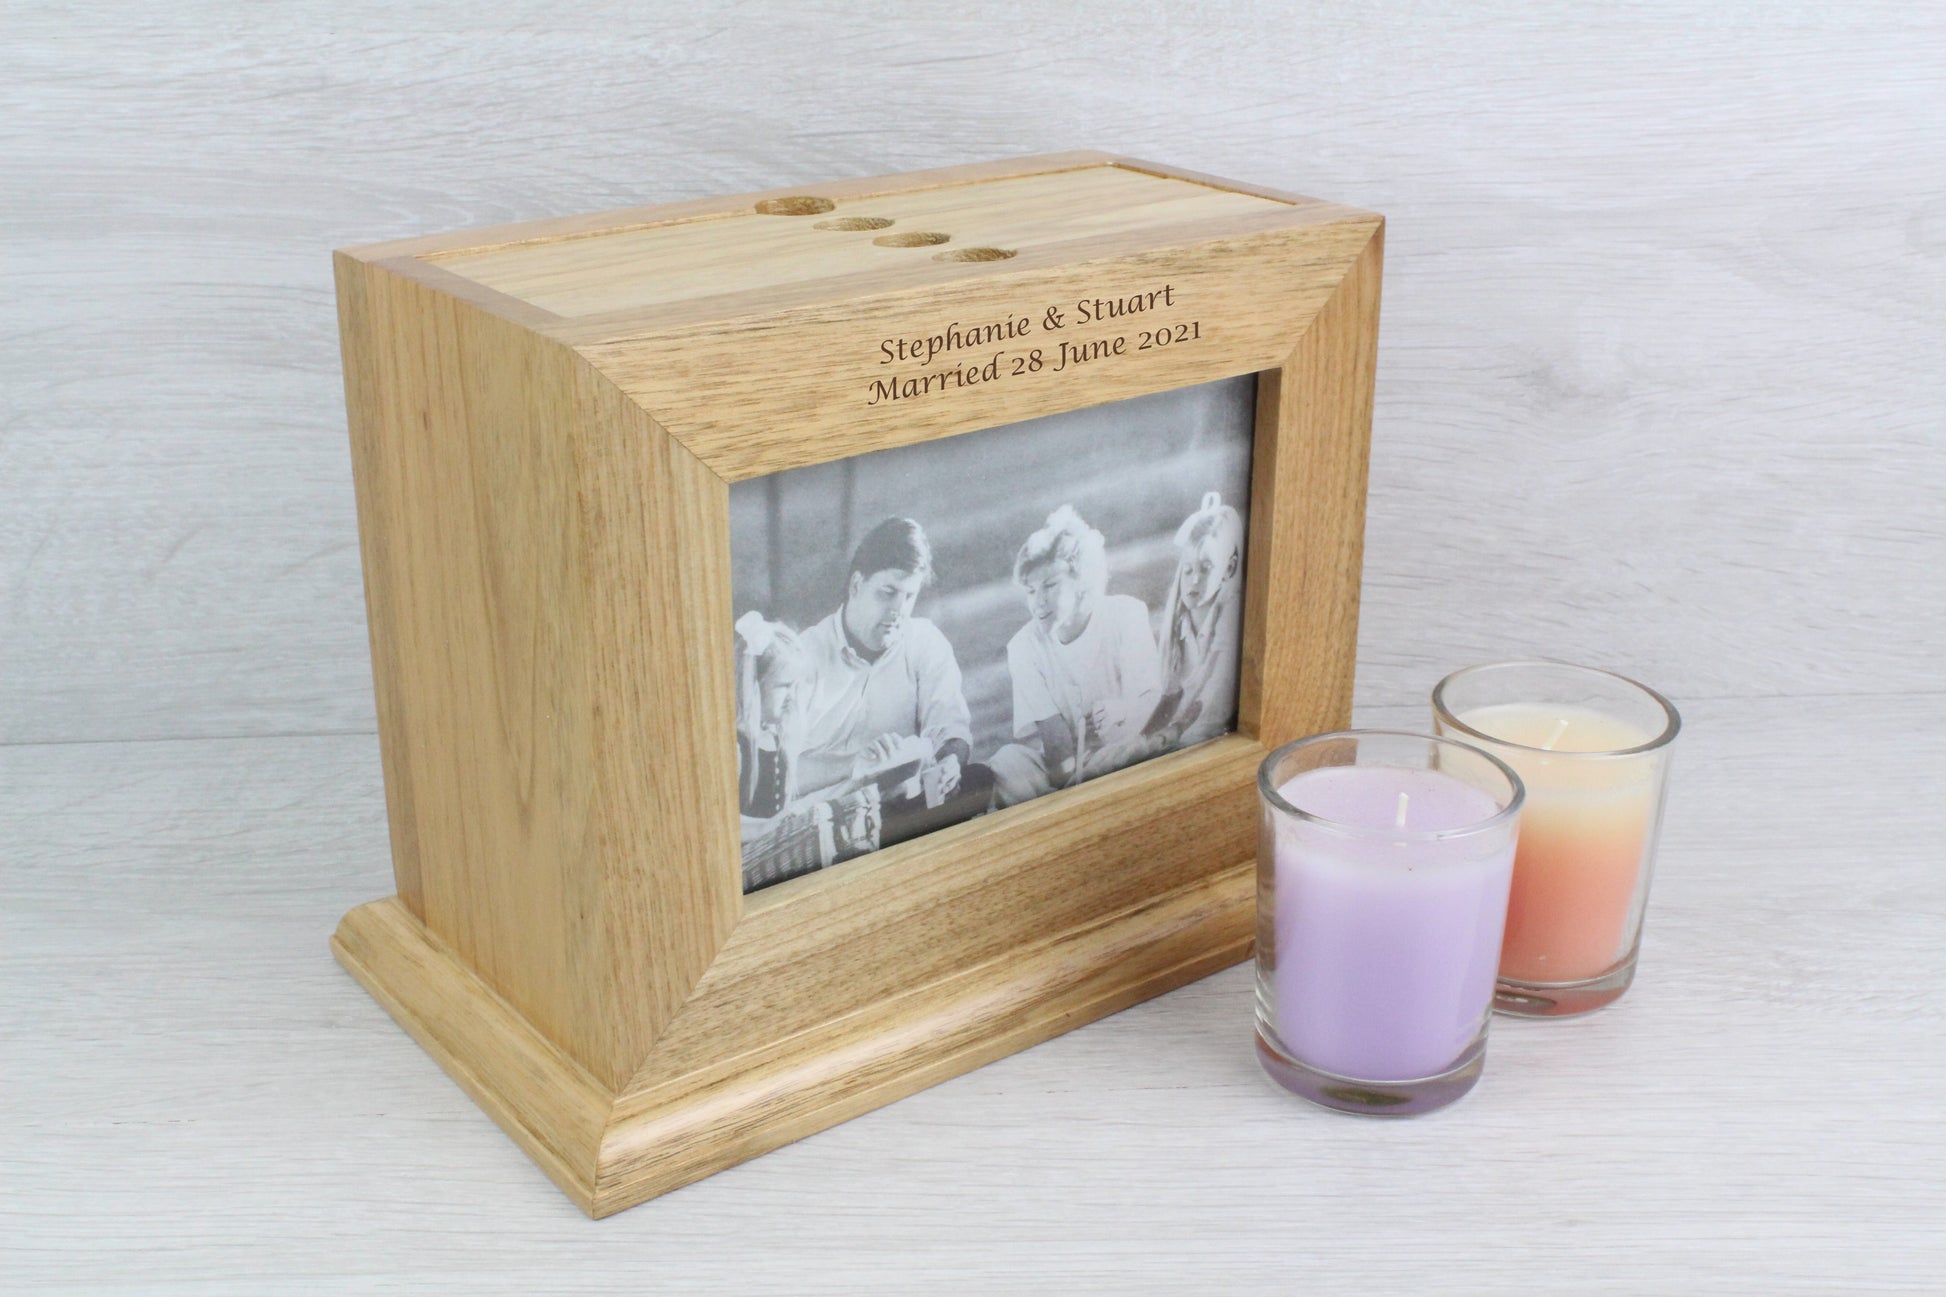 Sideview of a Personalised Oak Wooden Photo Frame and Album Holder with a text engraving that says "Stephanie & Stuart Married 28 June 2021" Inside the wooden photo frame, there's a black and white family photo with two young girls and their parents. Also, beside the wooden frame, there are two not lighted candles (colour purple and orange).